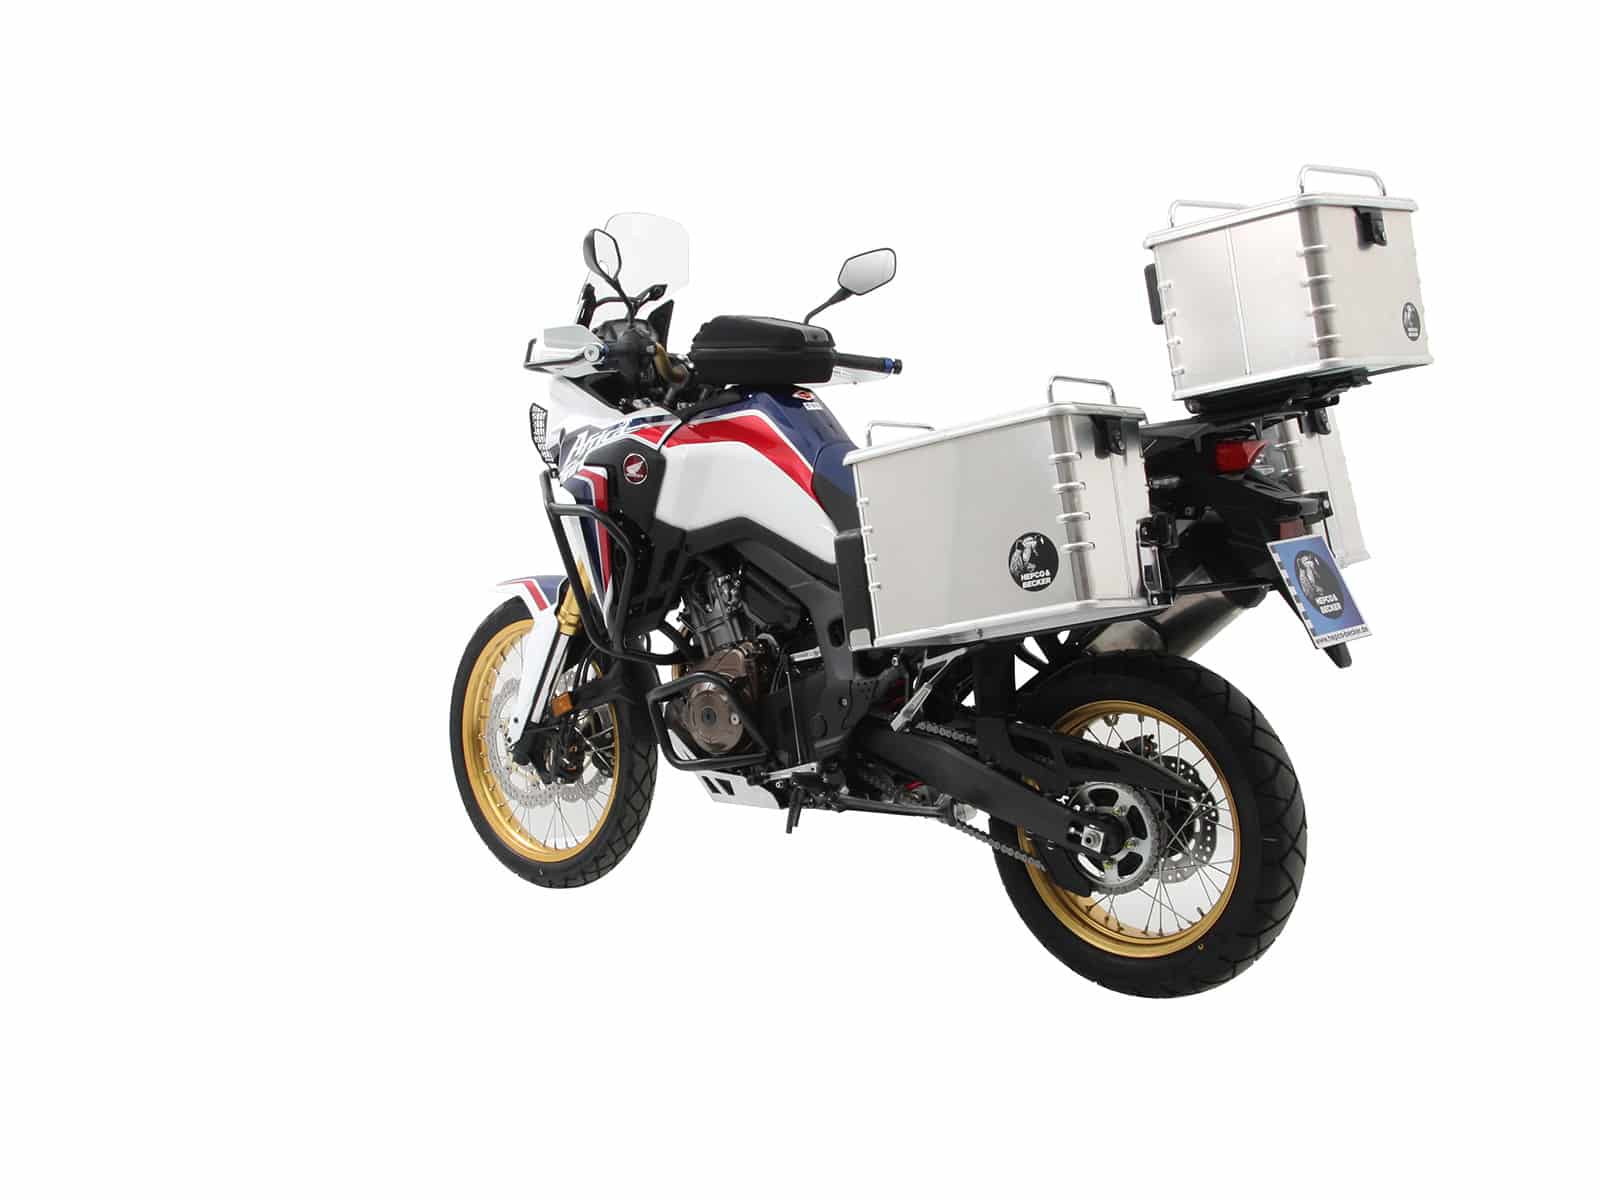 Sidecarrier permanent mounted black for Honda CRF 1000 Africa Twin (2016-2017)